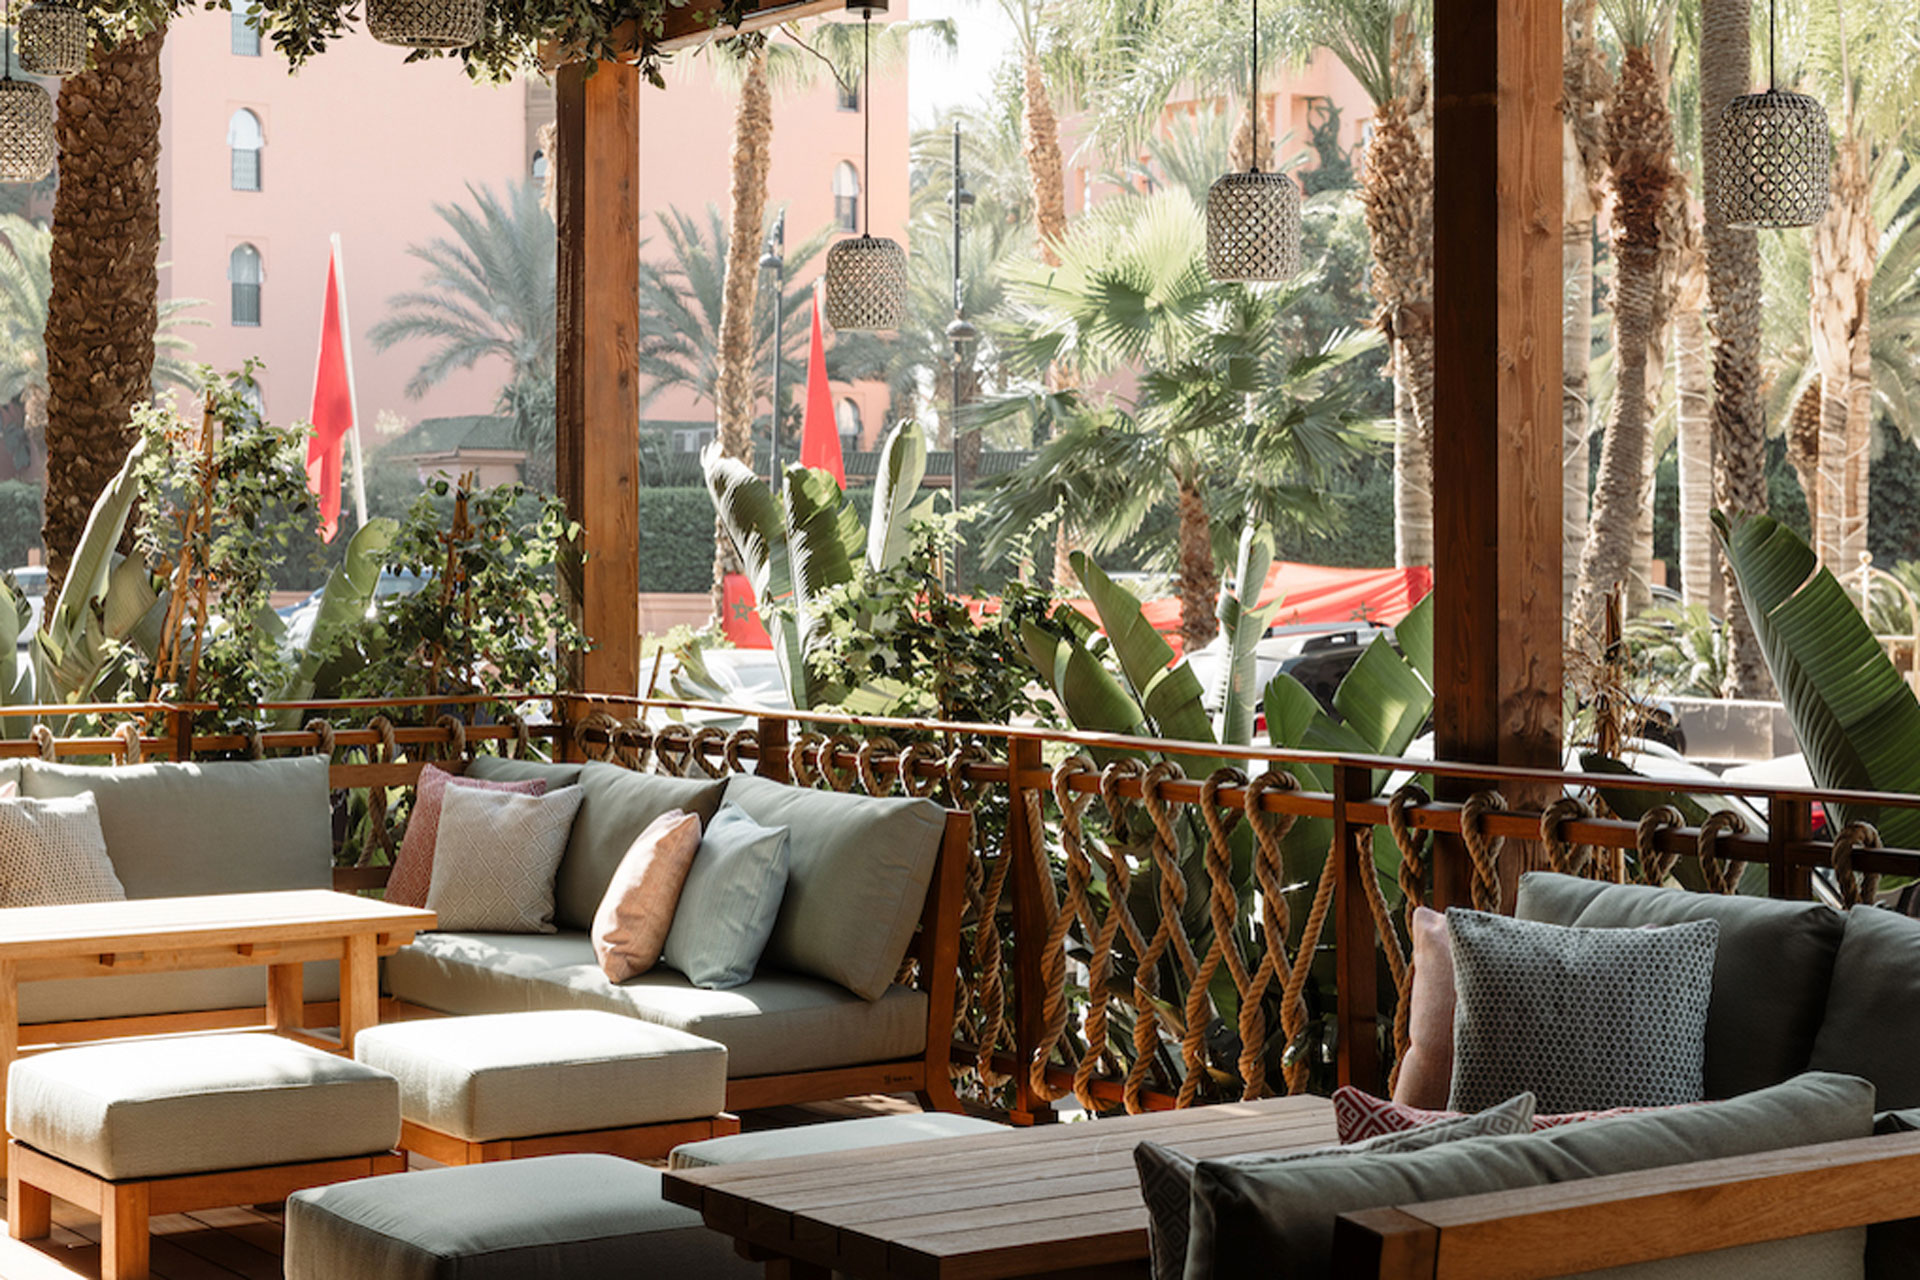 Outdoor restaurant at Nobu Hotel Marrakech, with outdoor seating and palm fronds.